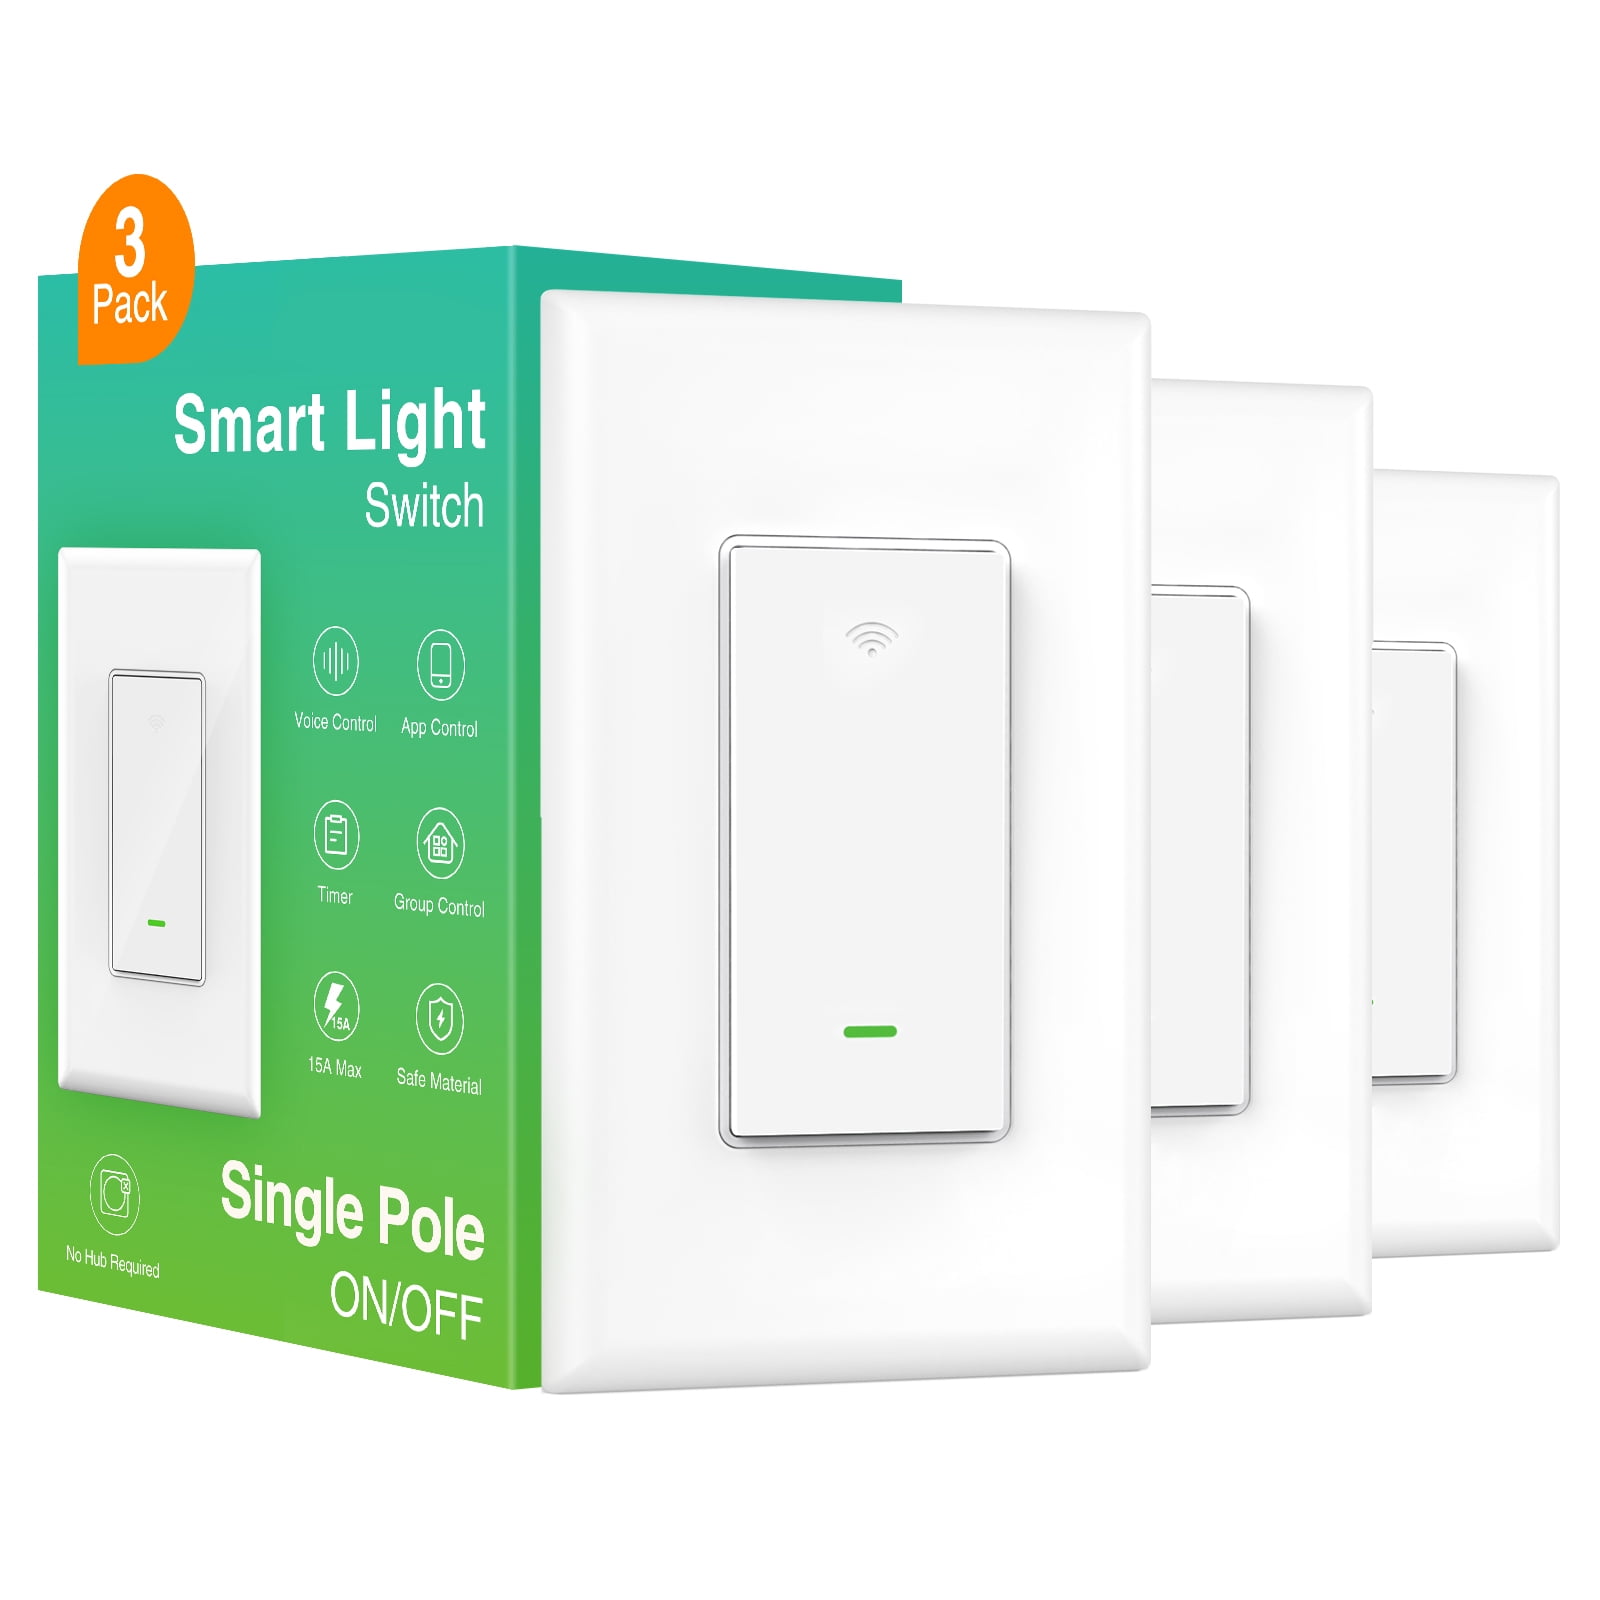 WiFi In Wall Smart Switch Light App Timer Alexa Google Home Remote Voice  Control